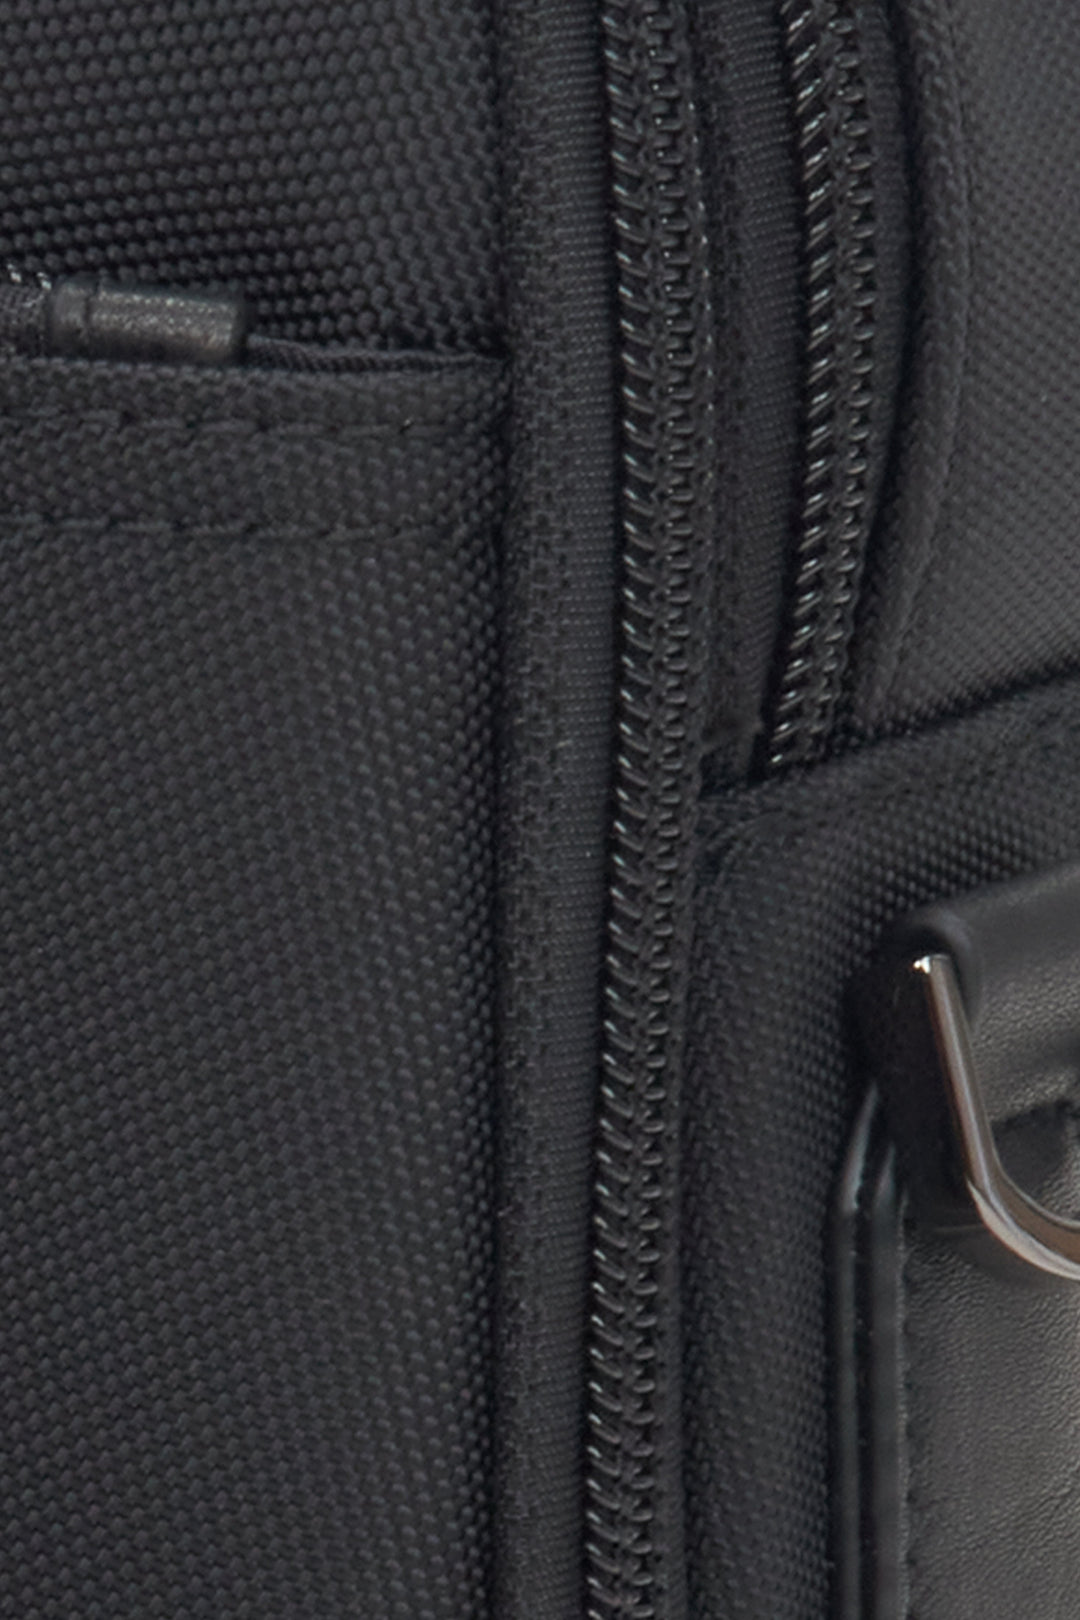 Close-up on the detail of the men's black bag by Estro.